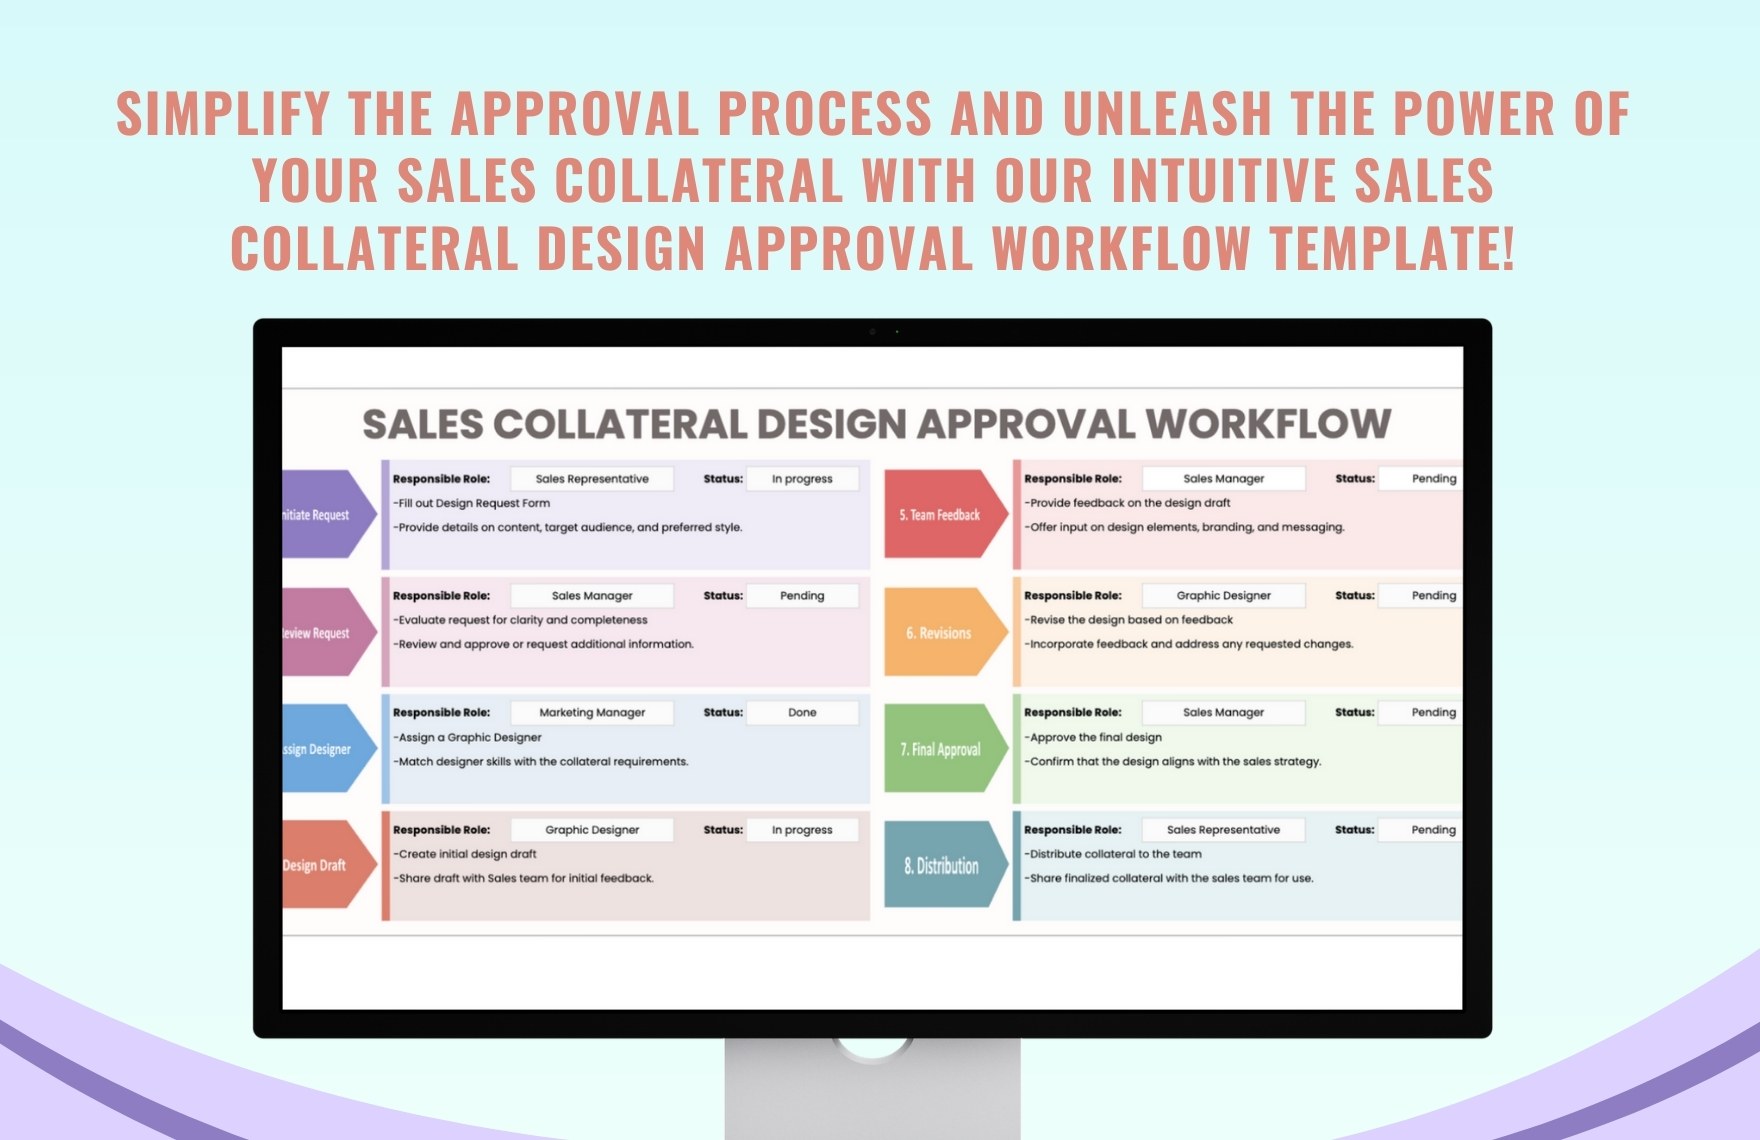 Sales Collateral Design Approval Workflow Template